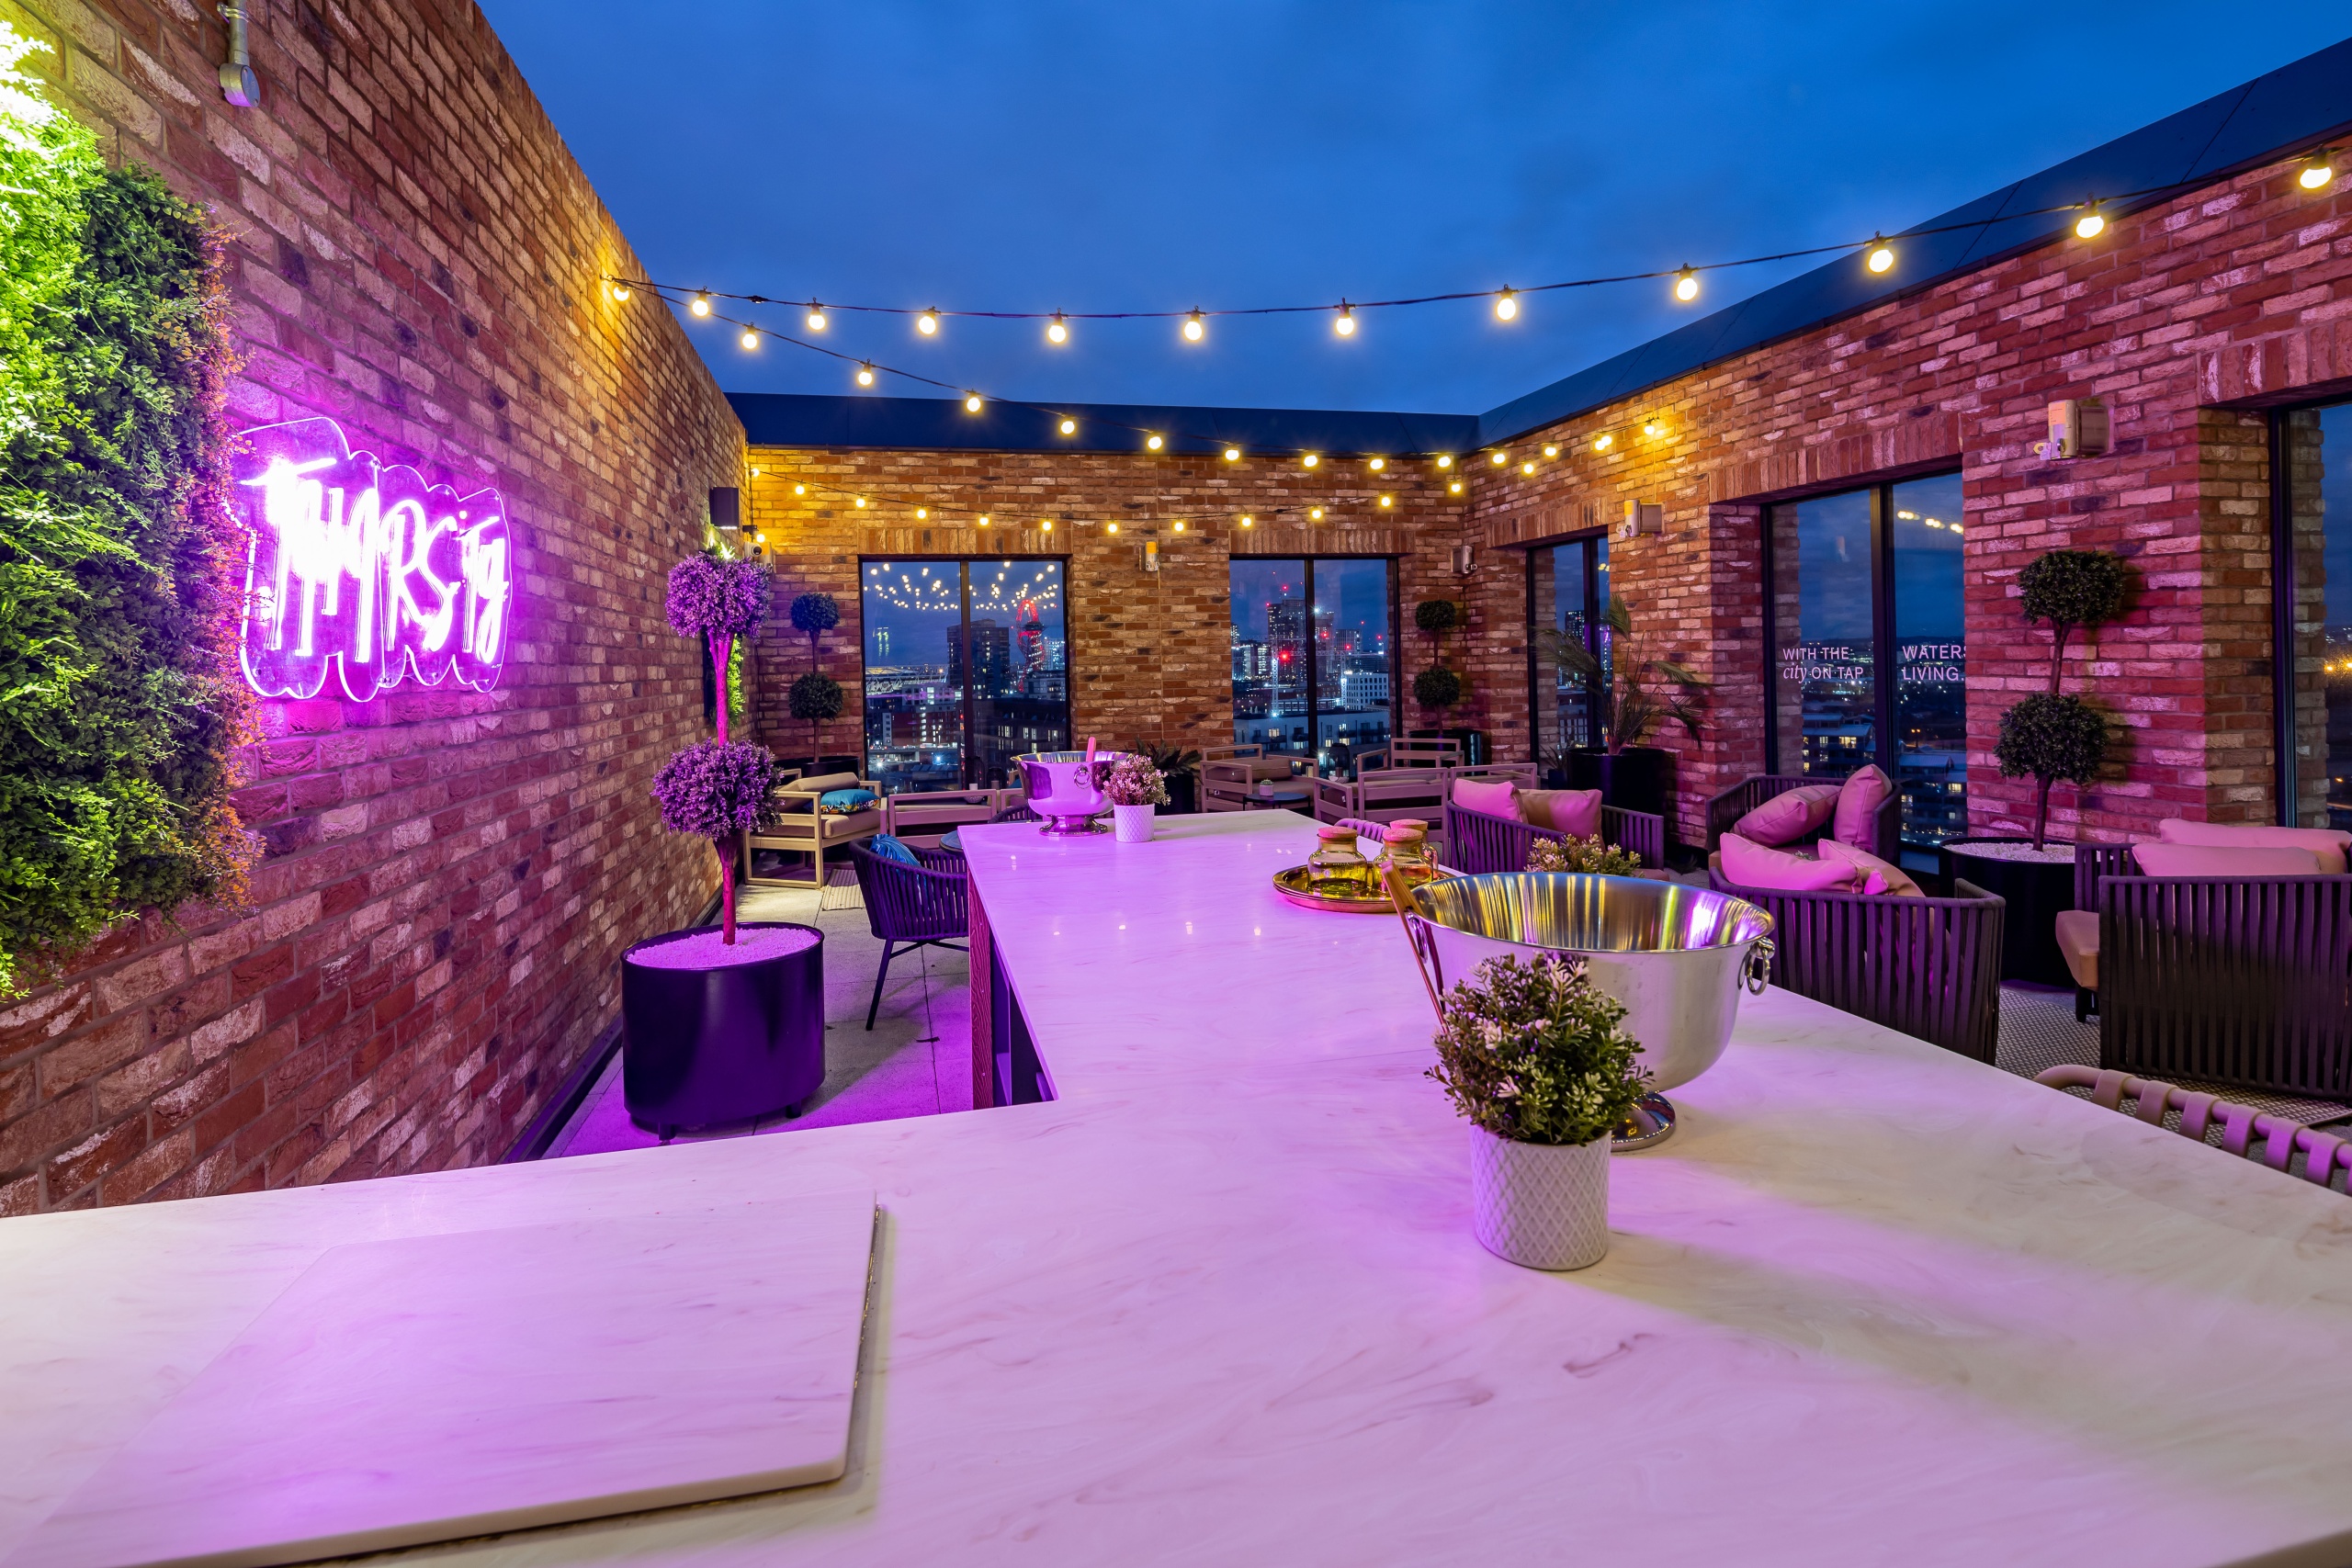 Rooftop terrace with bar and lots of seats that overlook the city